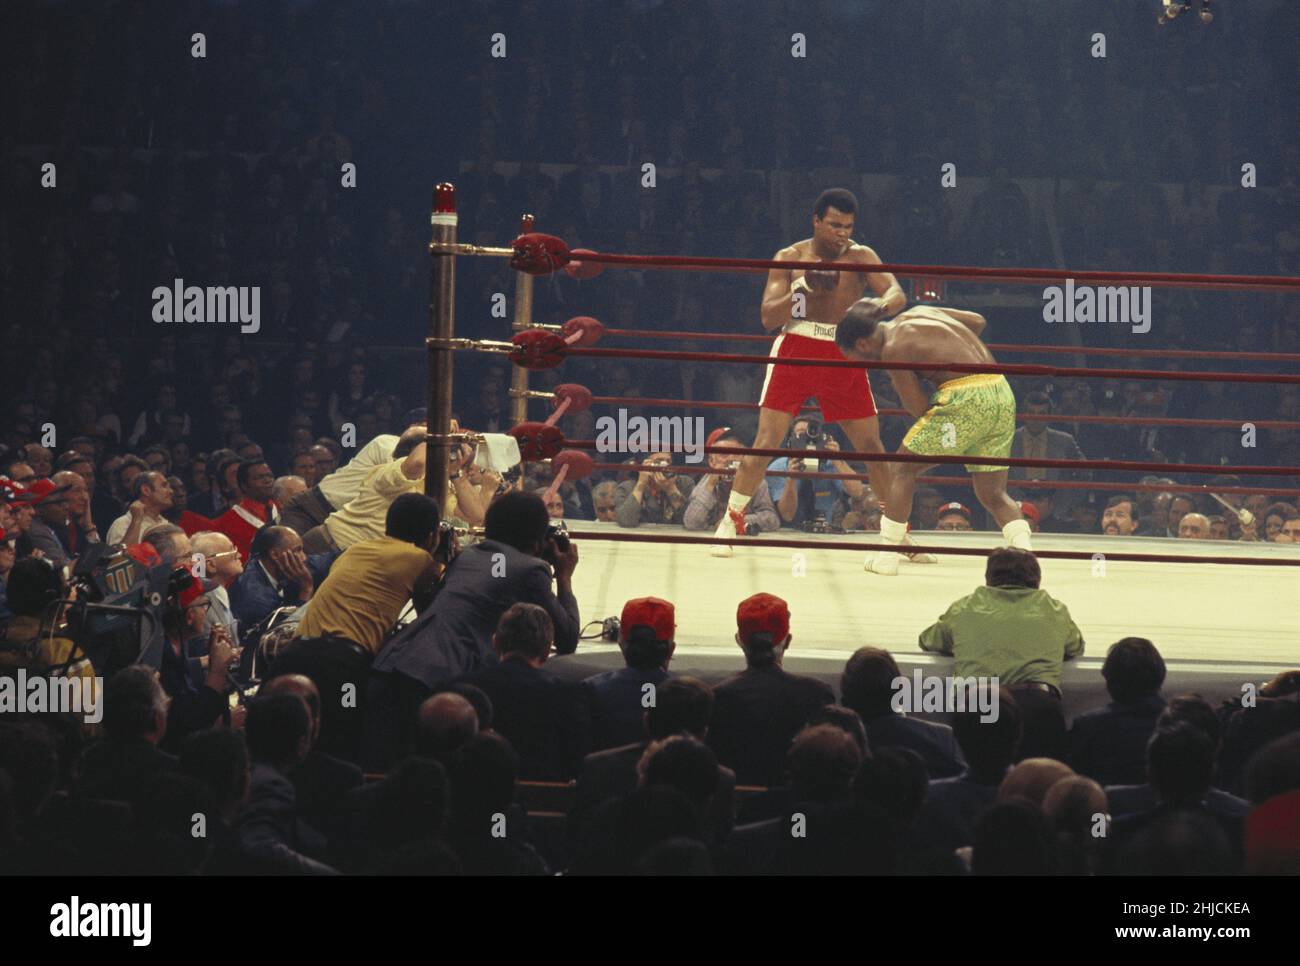 Muhammad Ali (born 1942) fighting Joe Frazier (born 1944) on March 8, 1971 at Madison Square Garden, New York City.  The 'Fight of the Century' was a match between champion Frazier and challenger Ali.  Frazier won. Stock Photo